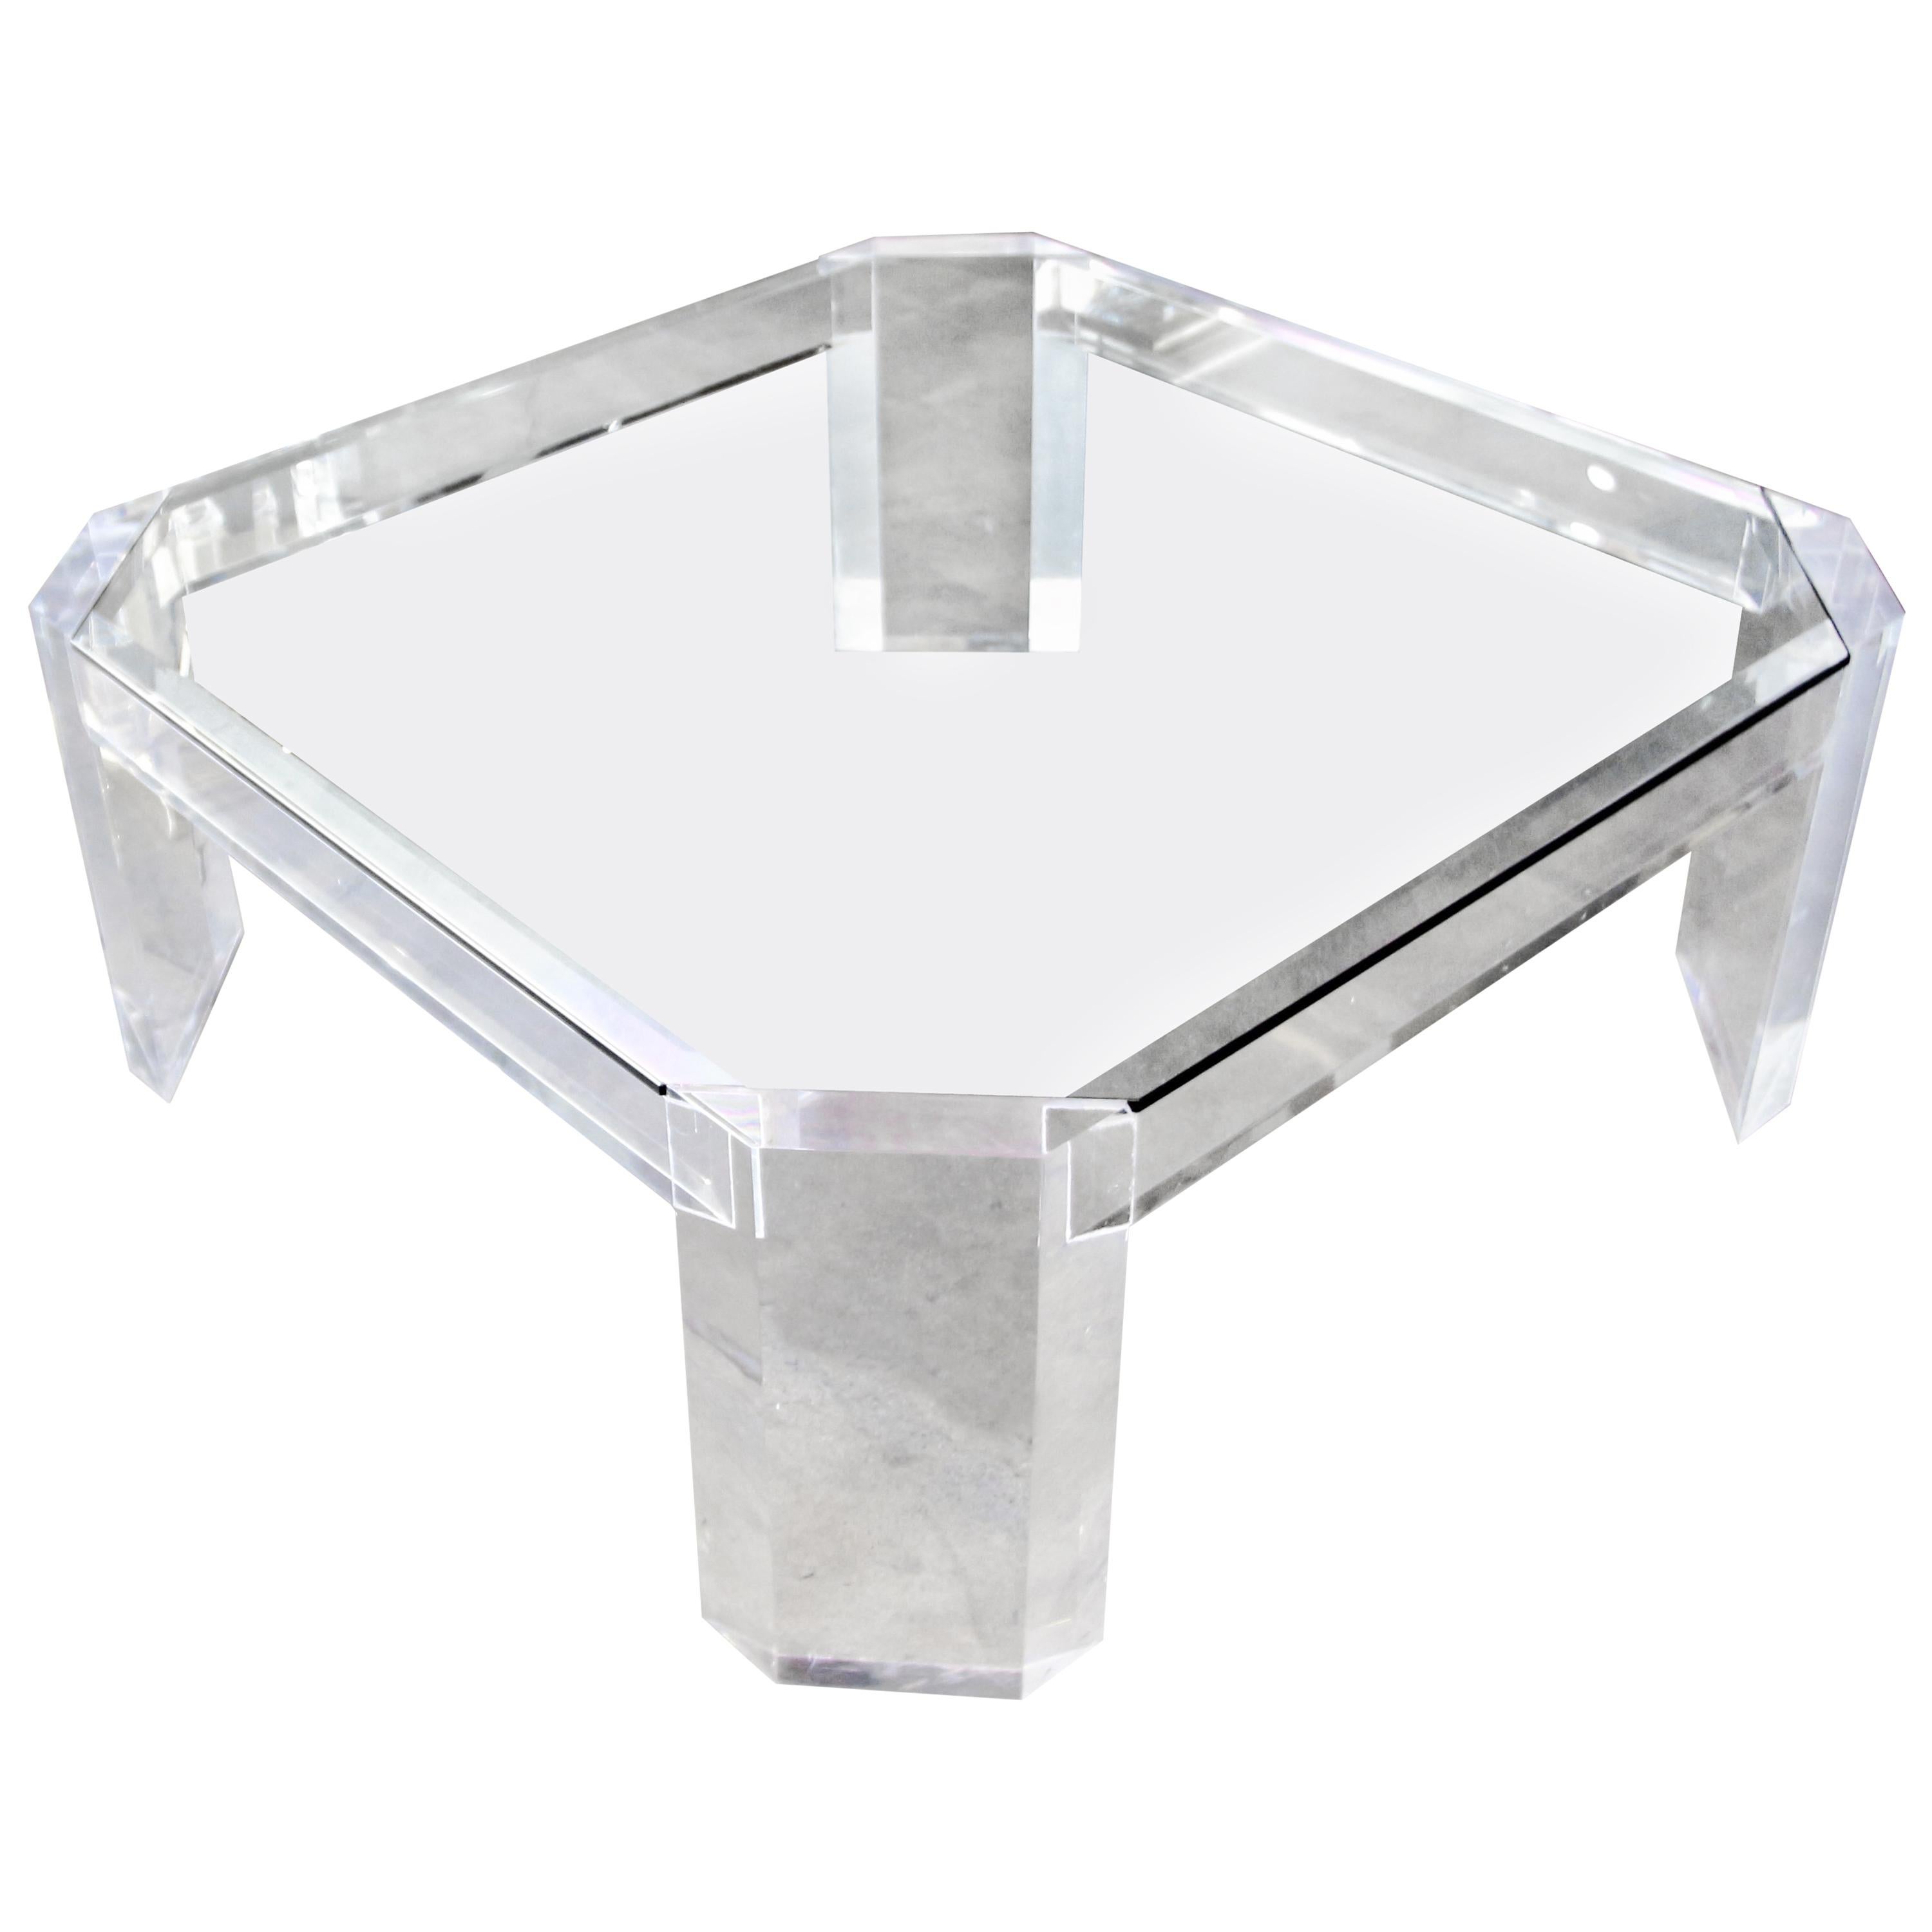 Charles Hollis Jones model 505 Lucite and Glass Coffee Table